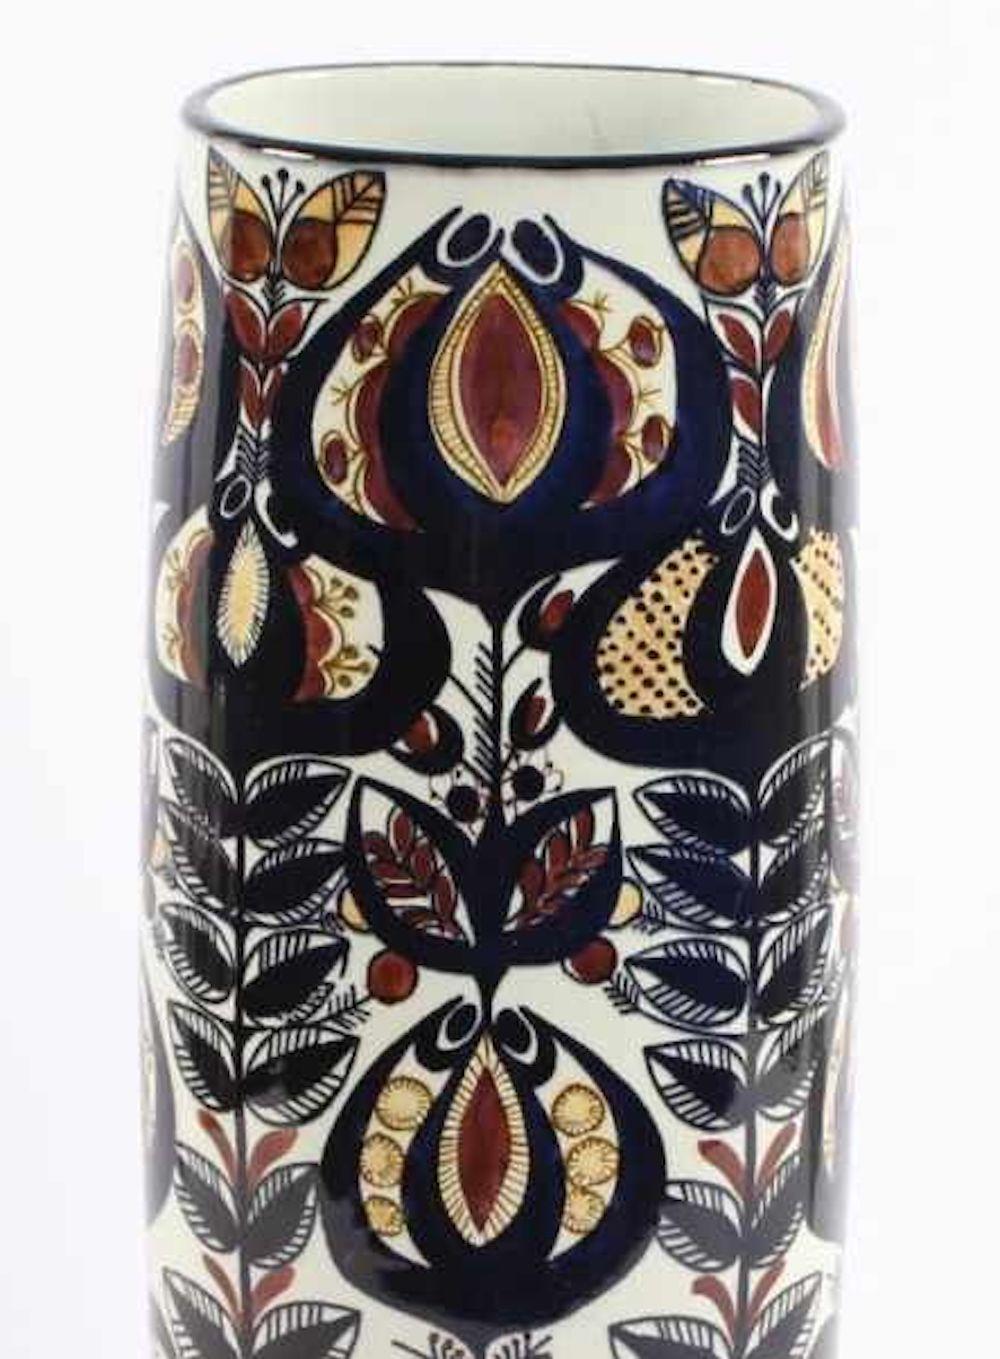 This Faience vase is an original decorative object realized in 1968 by Berte Jessen (BJ).

Beautiful barrel-shaped vase from Royal Copenhagen. Designed by Berte Jessen, for the Tenera range. The design is floral and in shades of blue with